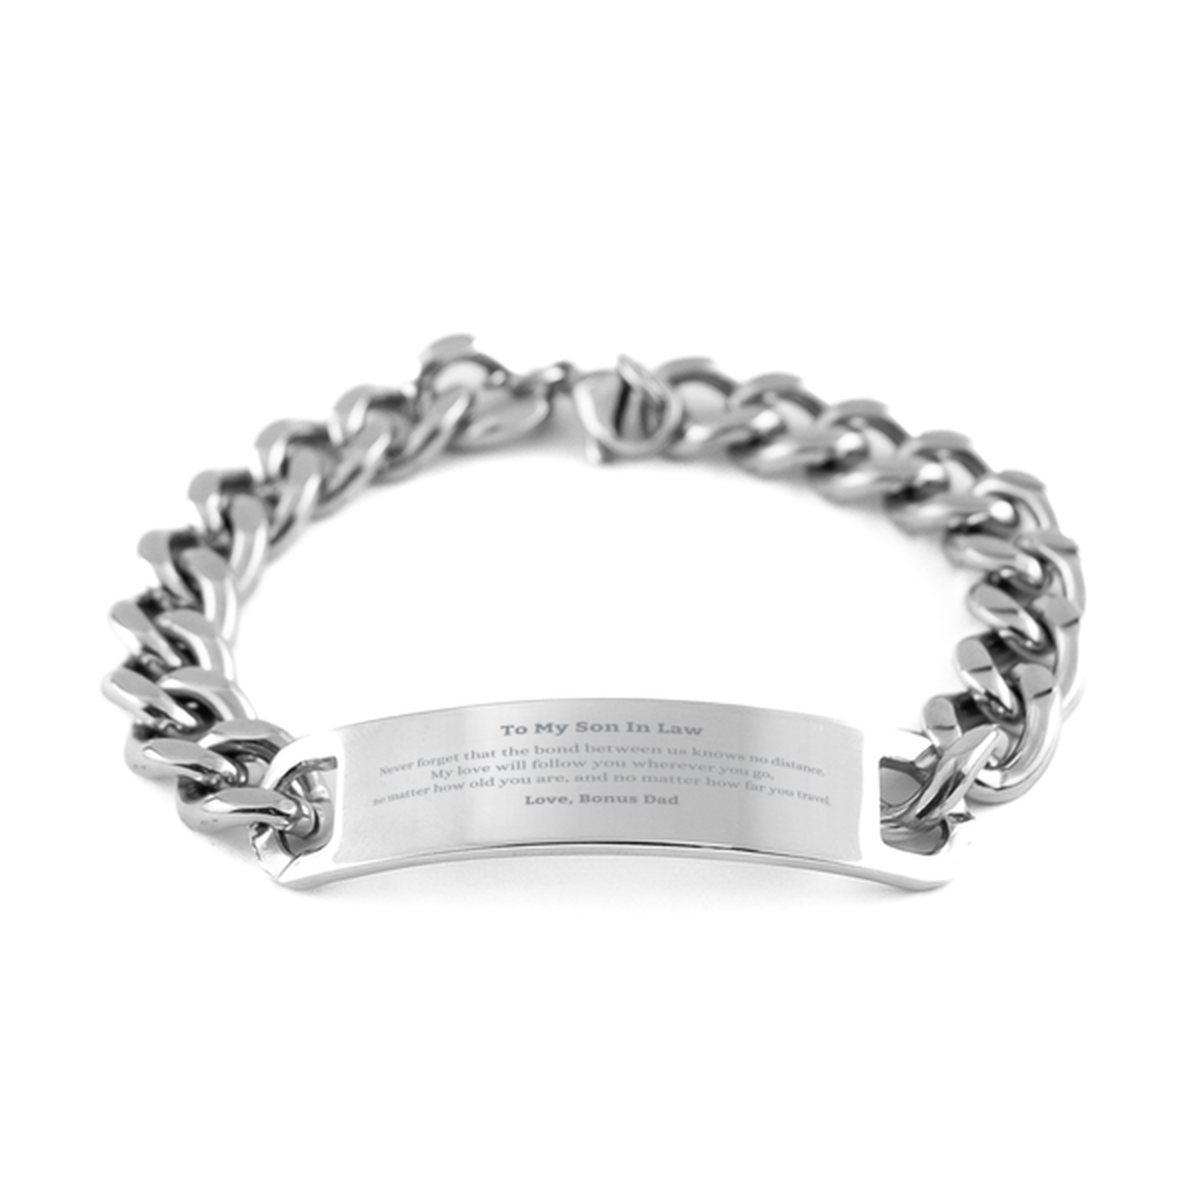 Son In Law Birthday Gifts from Bonus Dad, Adjustable Cuban Chain Stainless Steel Bracelet for Son In Law Christmas Graduation Unique Gifts Son In Law Never forget that the bond between us knows no distance. Love, Bonus Dad